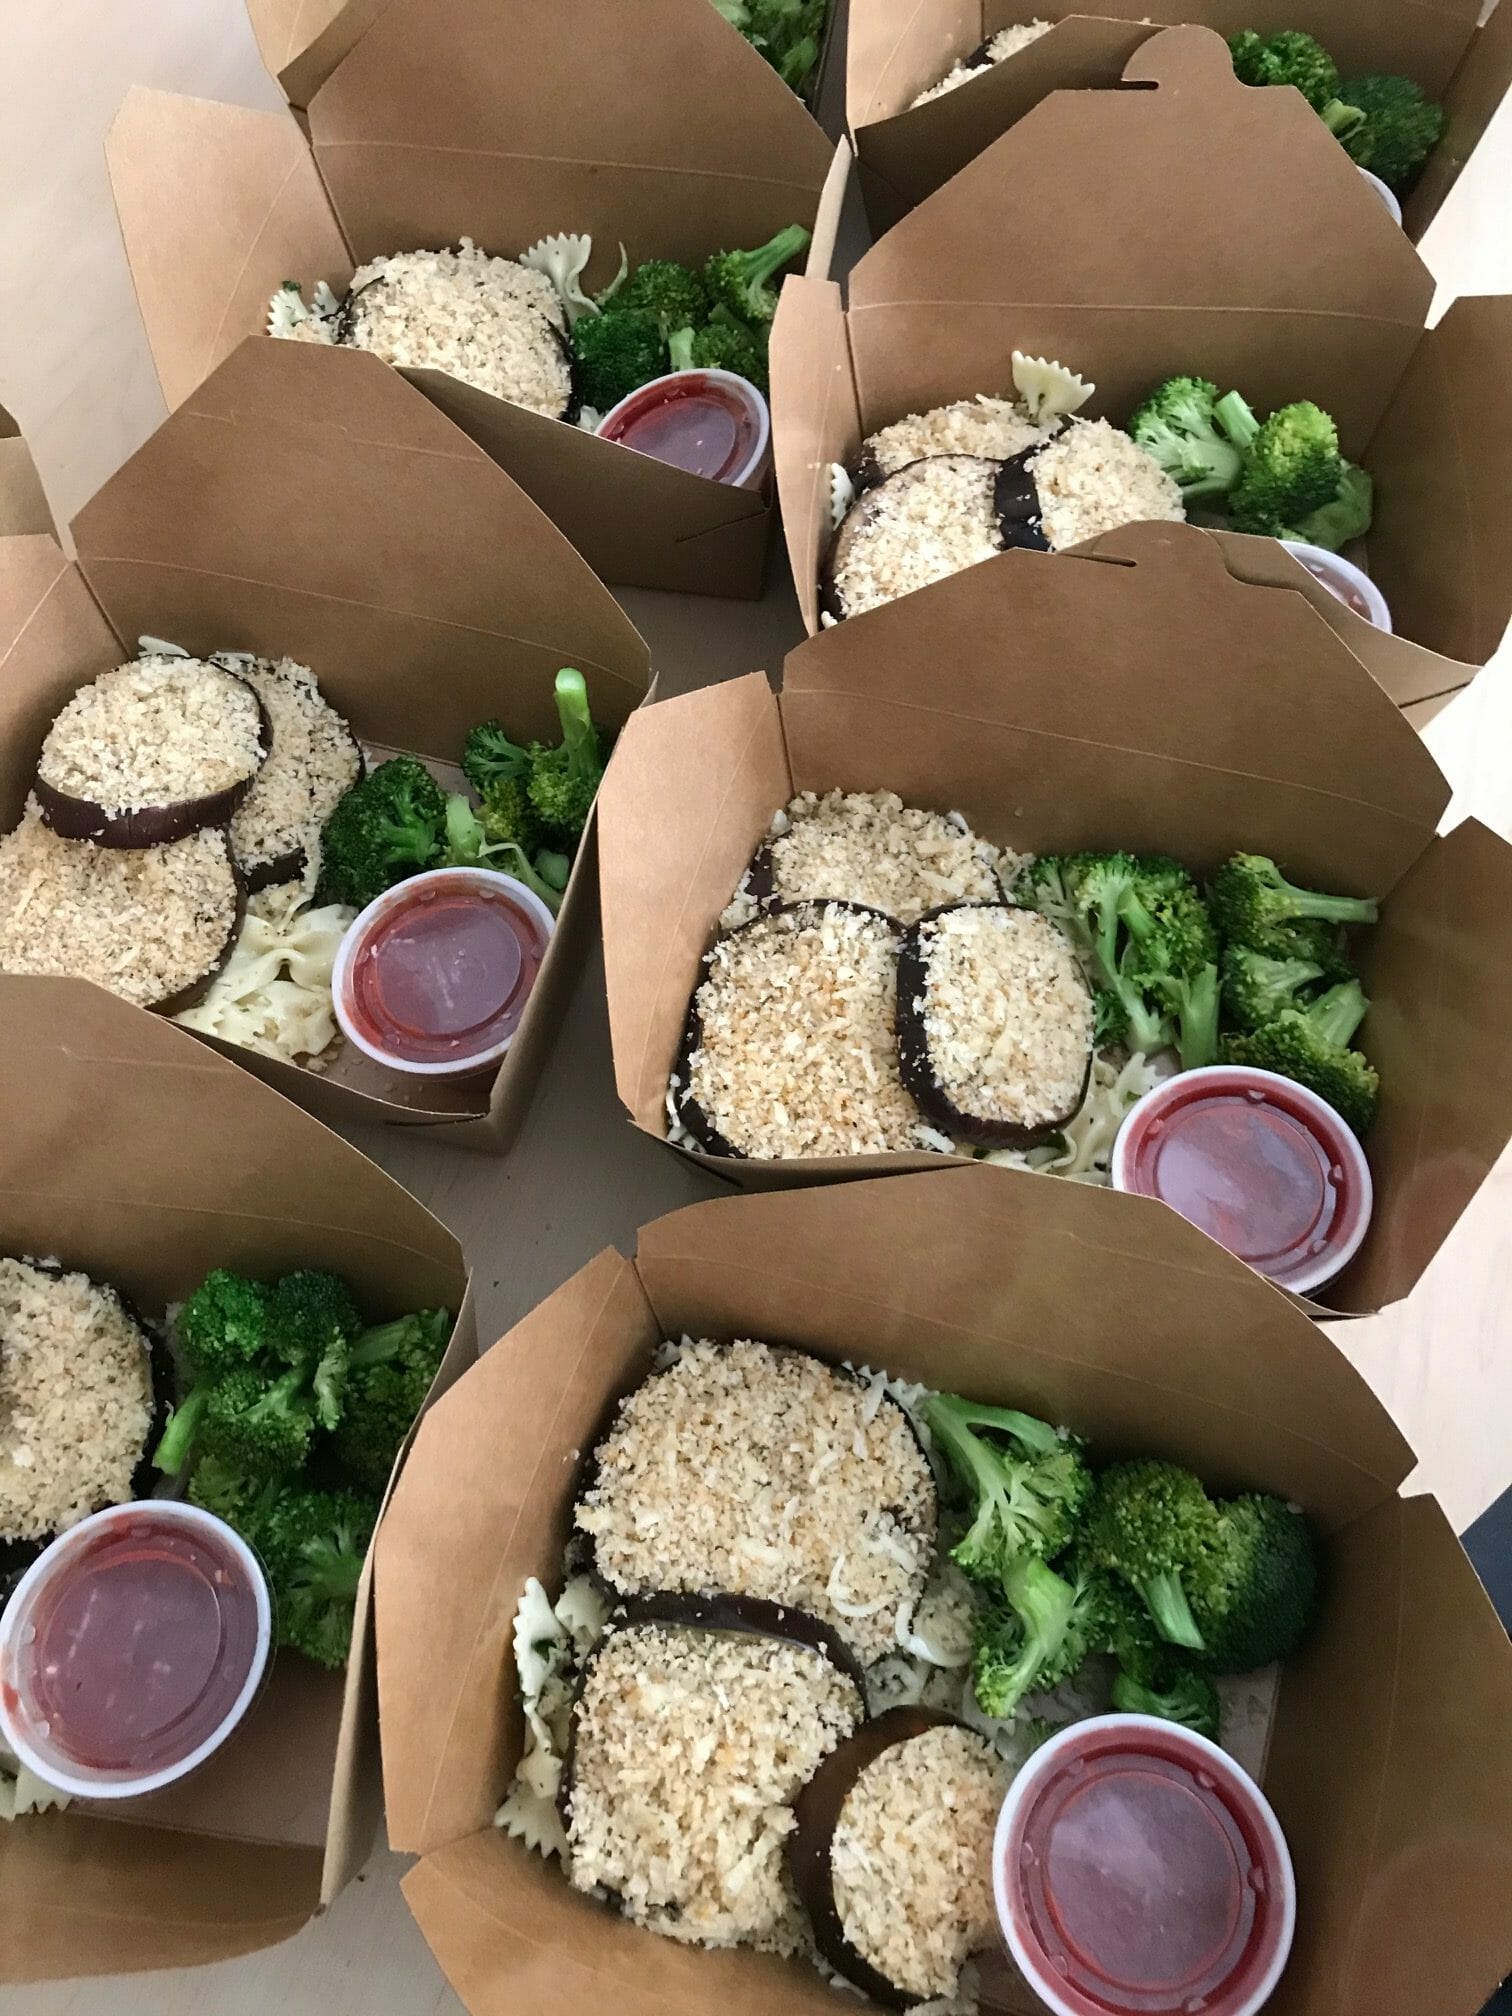 Student to-go Lunches with Flik